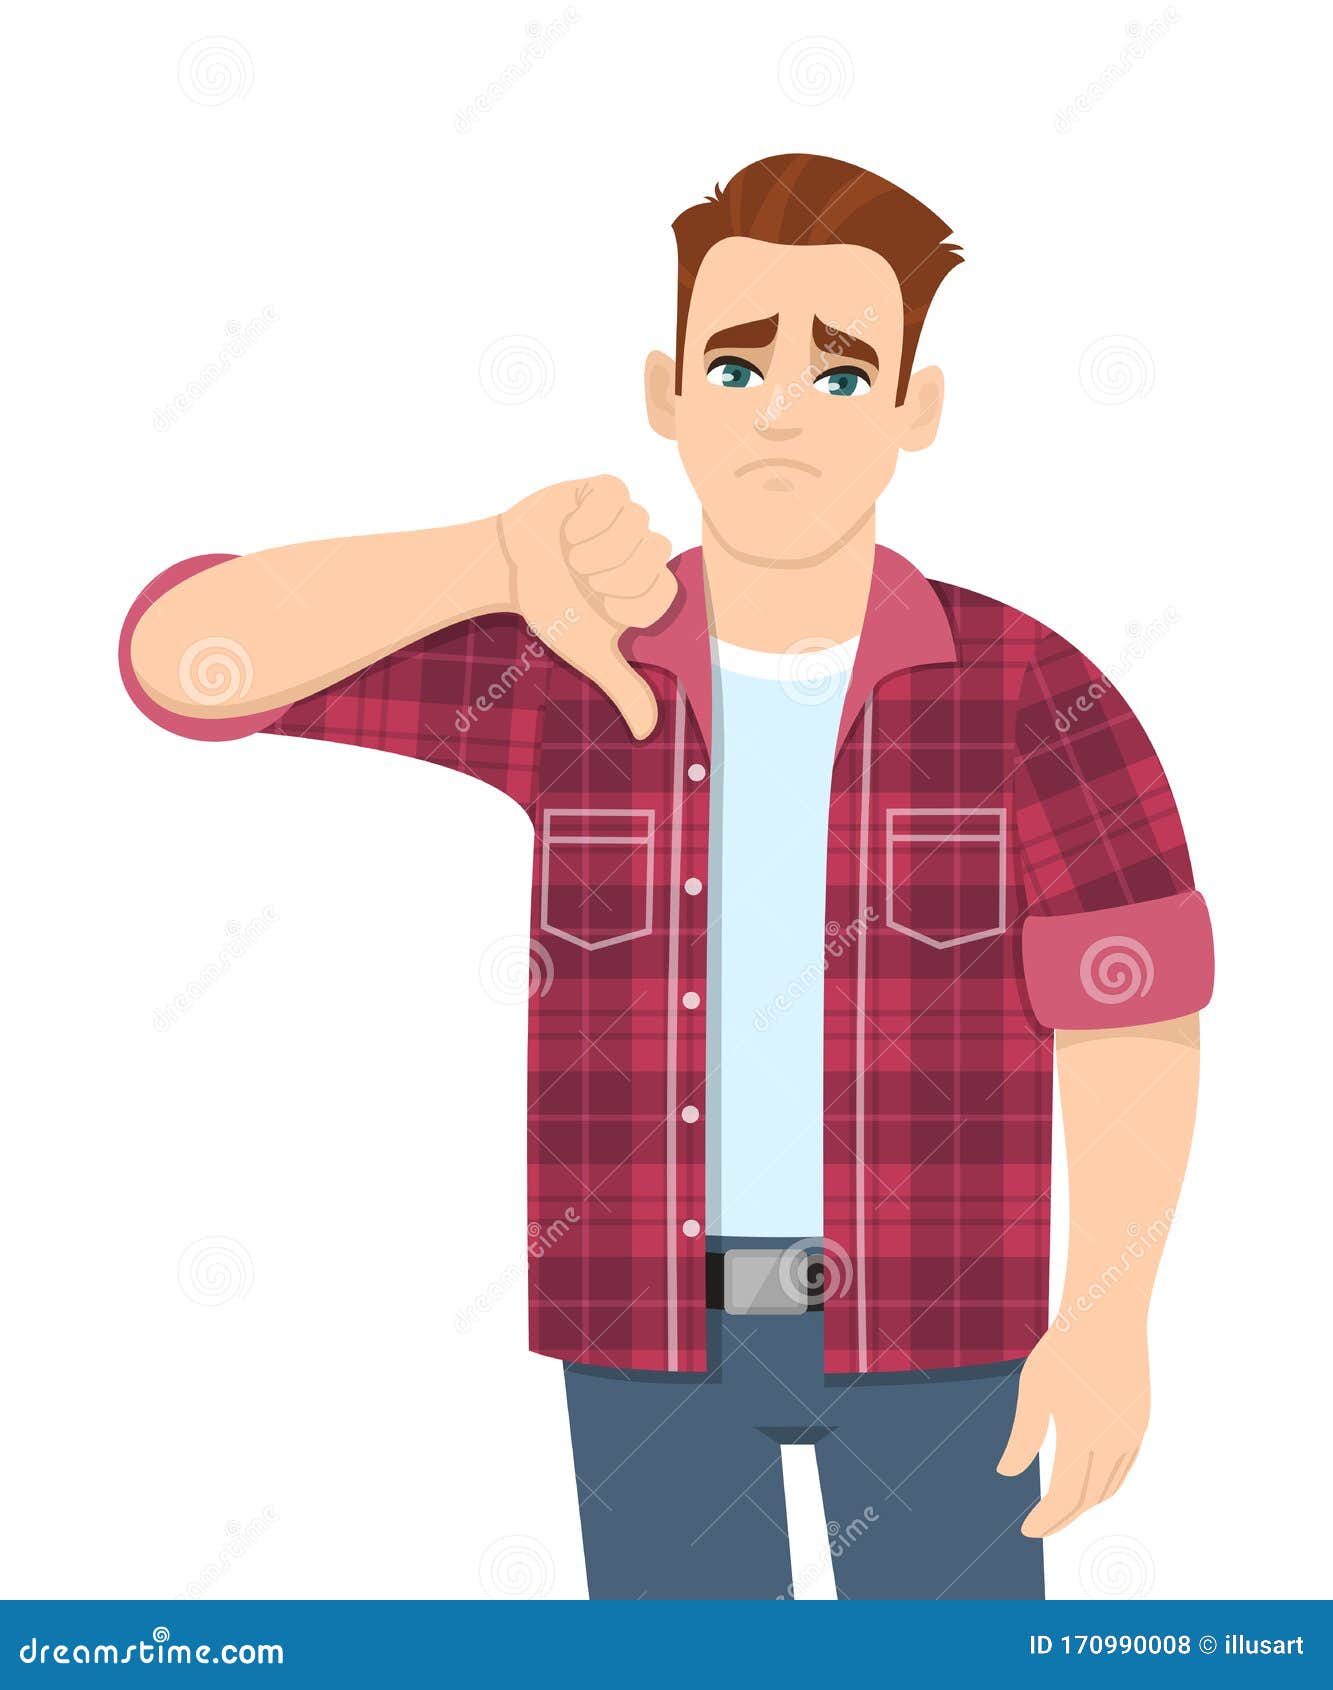 Cartoon Guy Thumbs Down Character Illustration Stock Illustrations – 58 Cartoon  Guy Thumbs Down Character Illustration Stock Illustrations, Vectors &  Clipart - Dreamstime